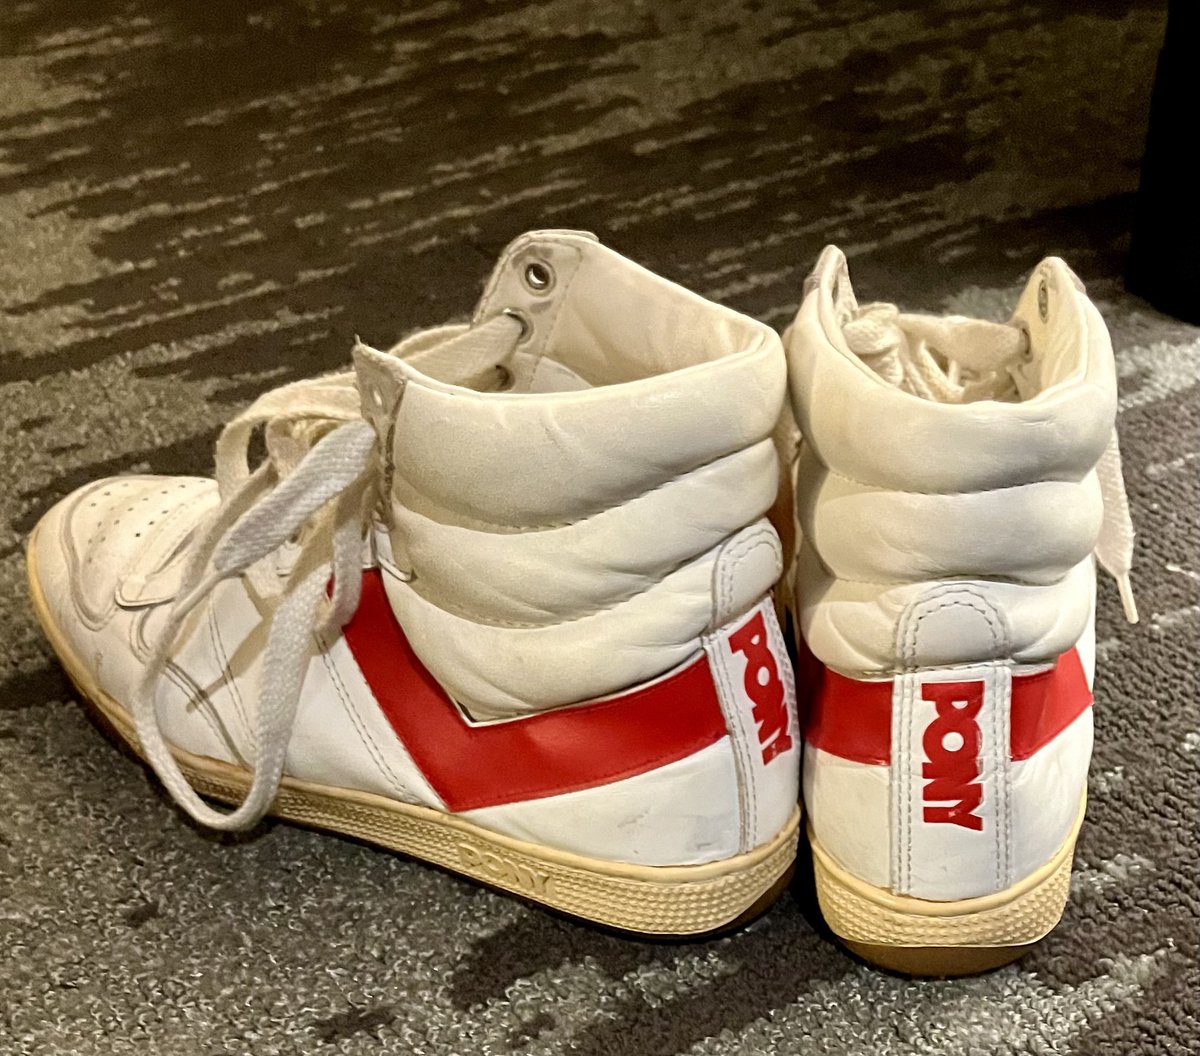 Worn twice, 41 years ago at The Pit. Gotta bring em back out today, right? Go Pack! ⁦@PackMensBball⁩ #FinalFour